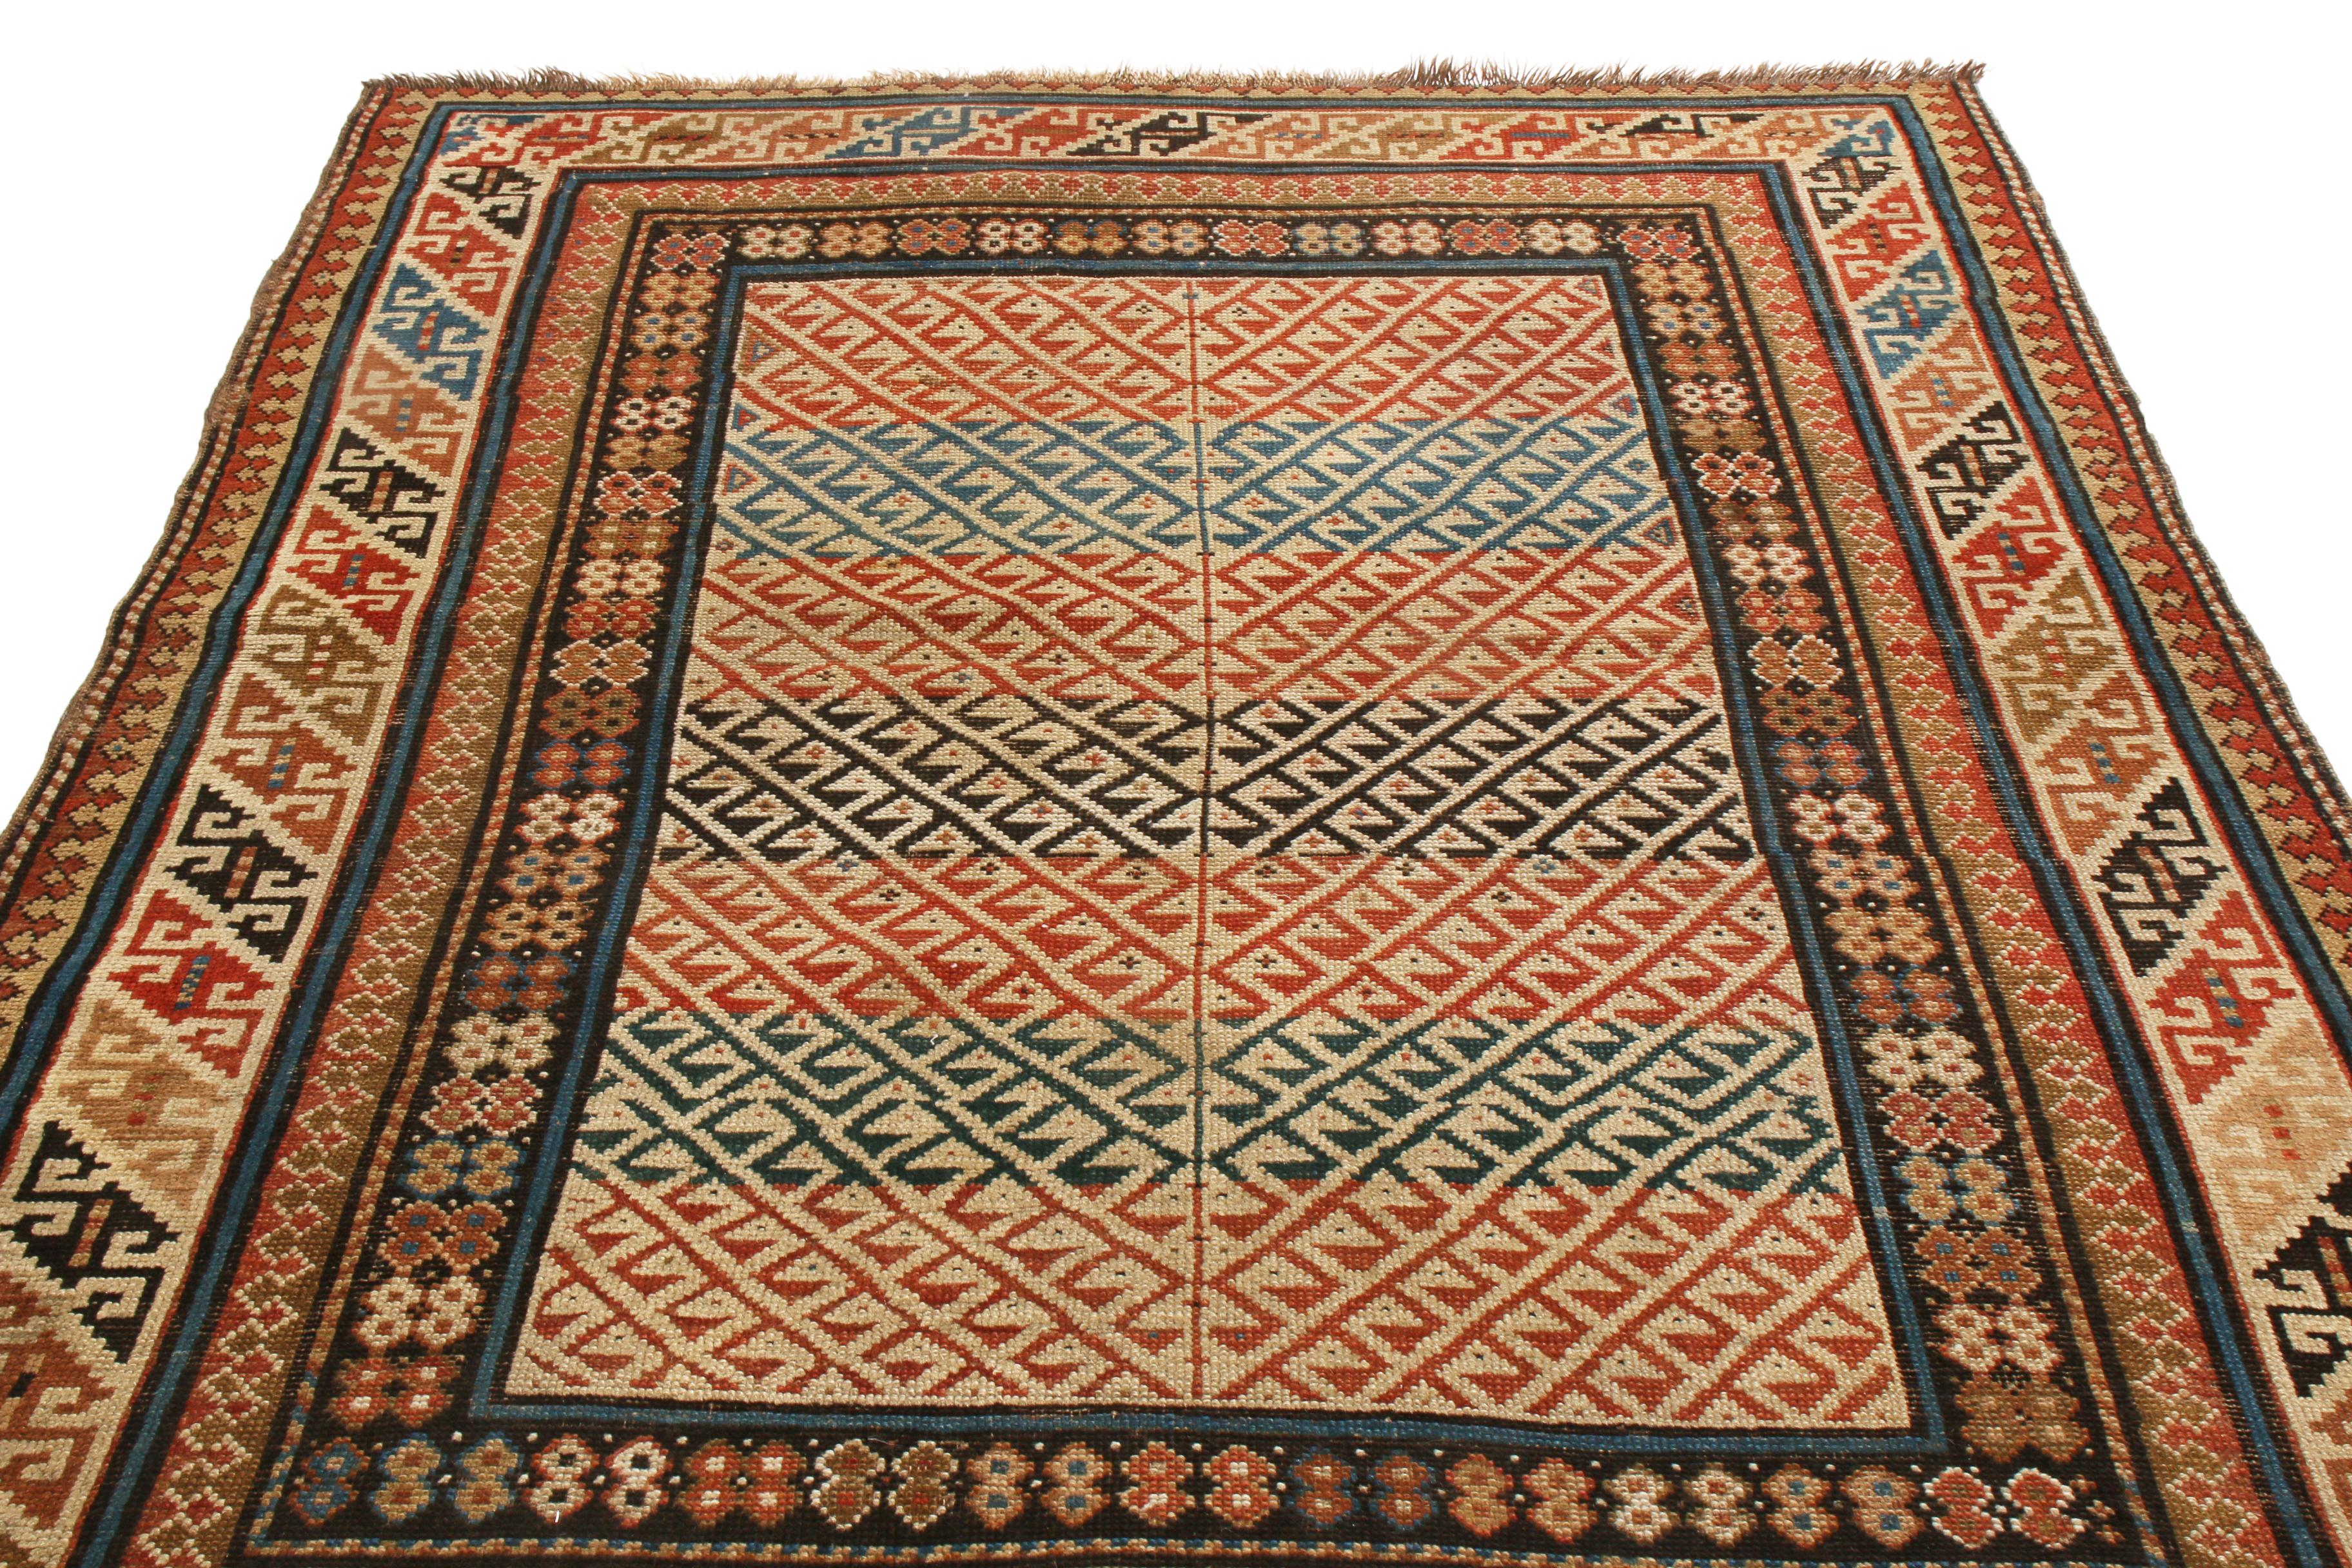 Originating from Russia between 1880-1890, this antique traditional Kuba rug features a unique interpretation of distinct oriental symbols. Hand knotted in high-quality wool, the field design portrays a series of perfectly mirrored Canavar Ayagi, or